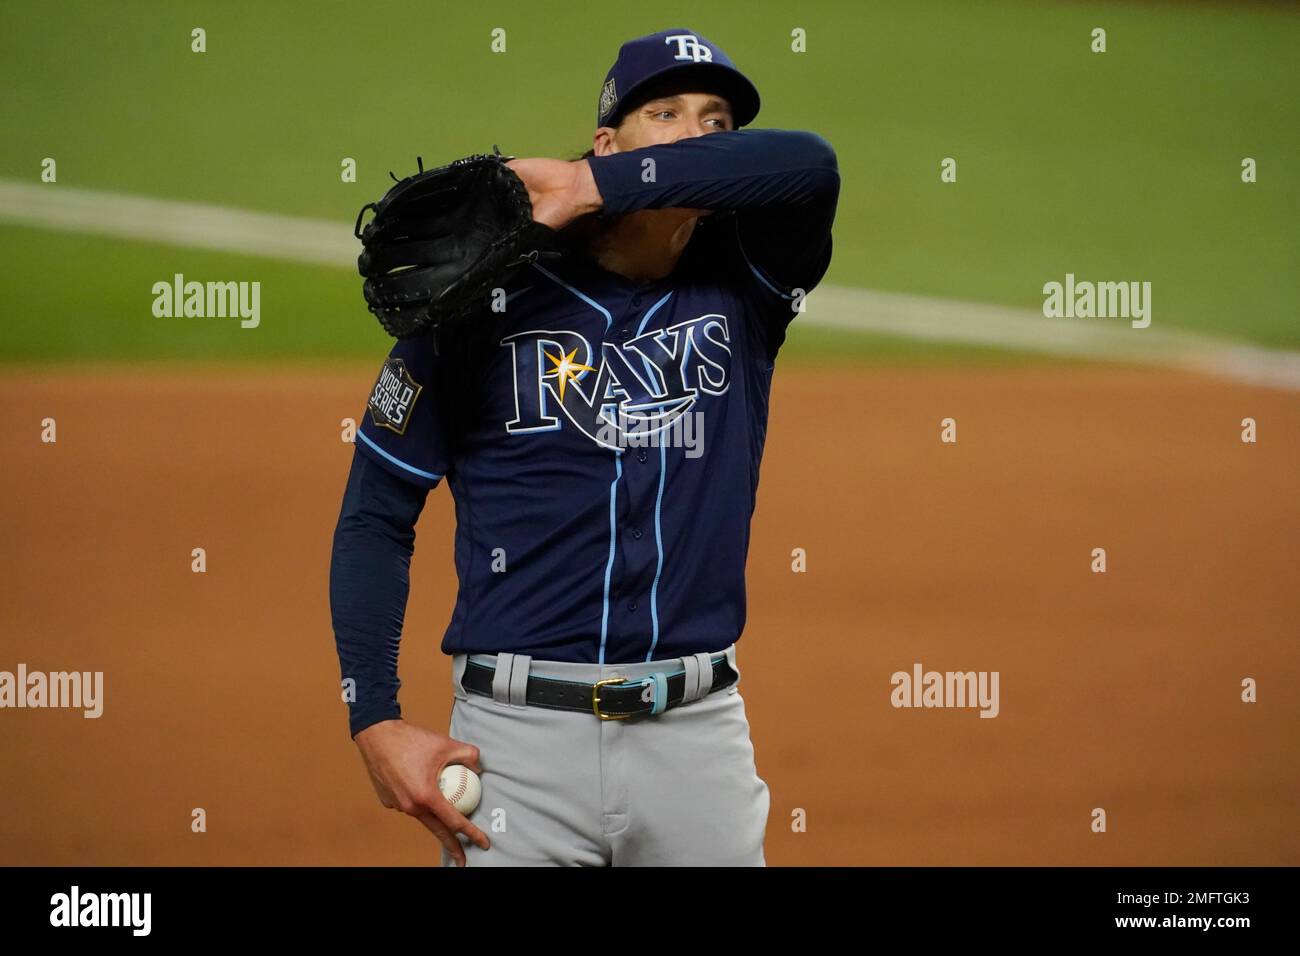 Tampa Bay Rays starting pitcher Tyler Glasnow wipes his face after